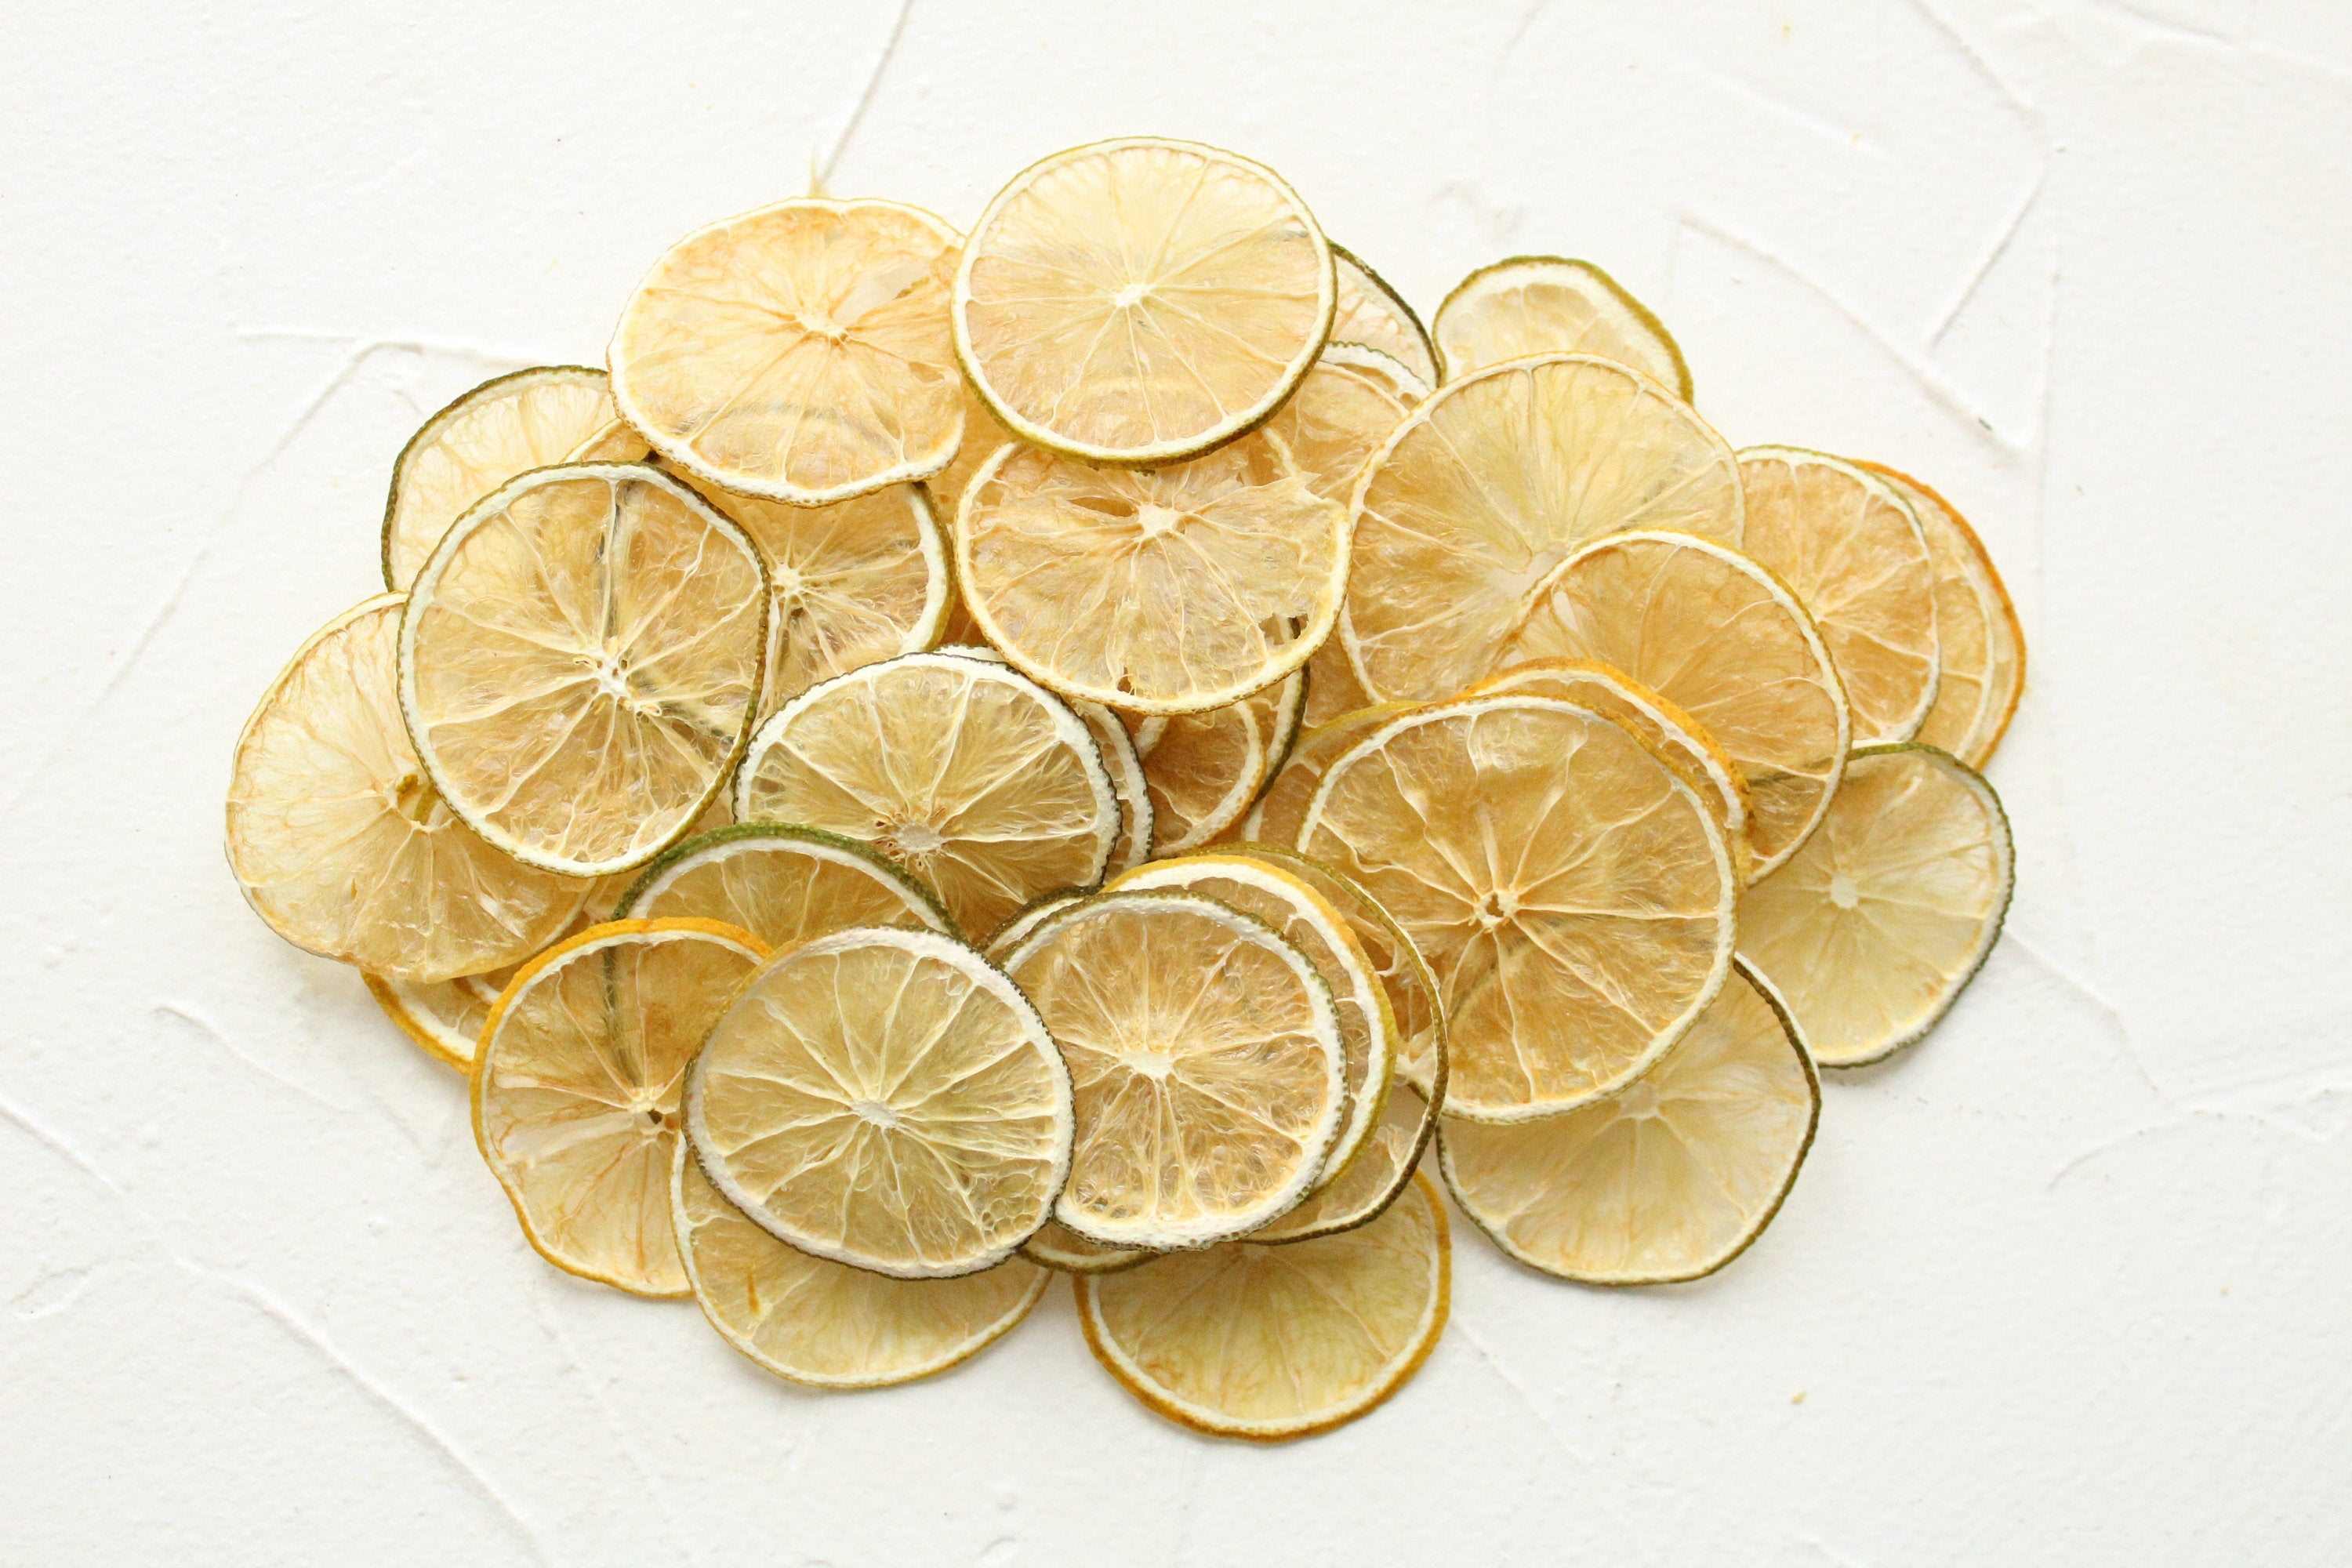 10 pcs of Dried Organic Homemade Lime Slices